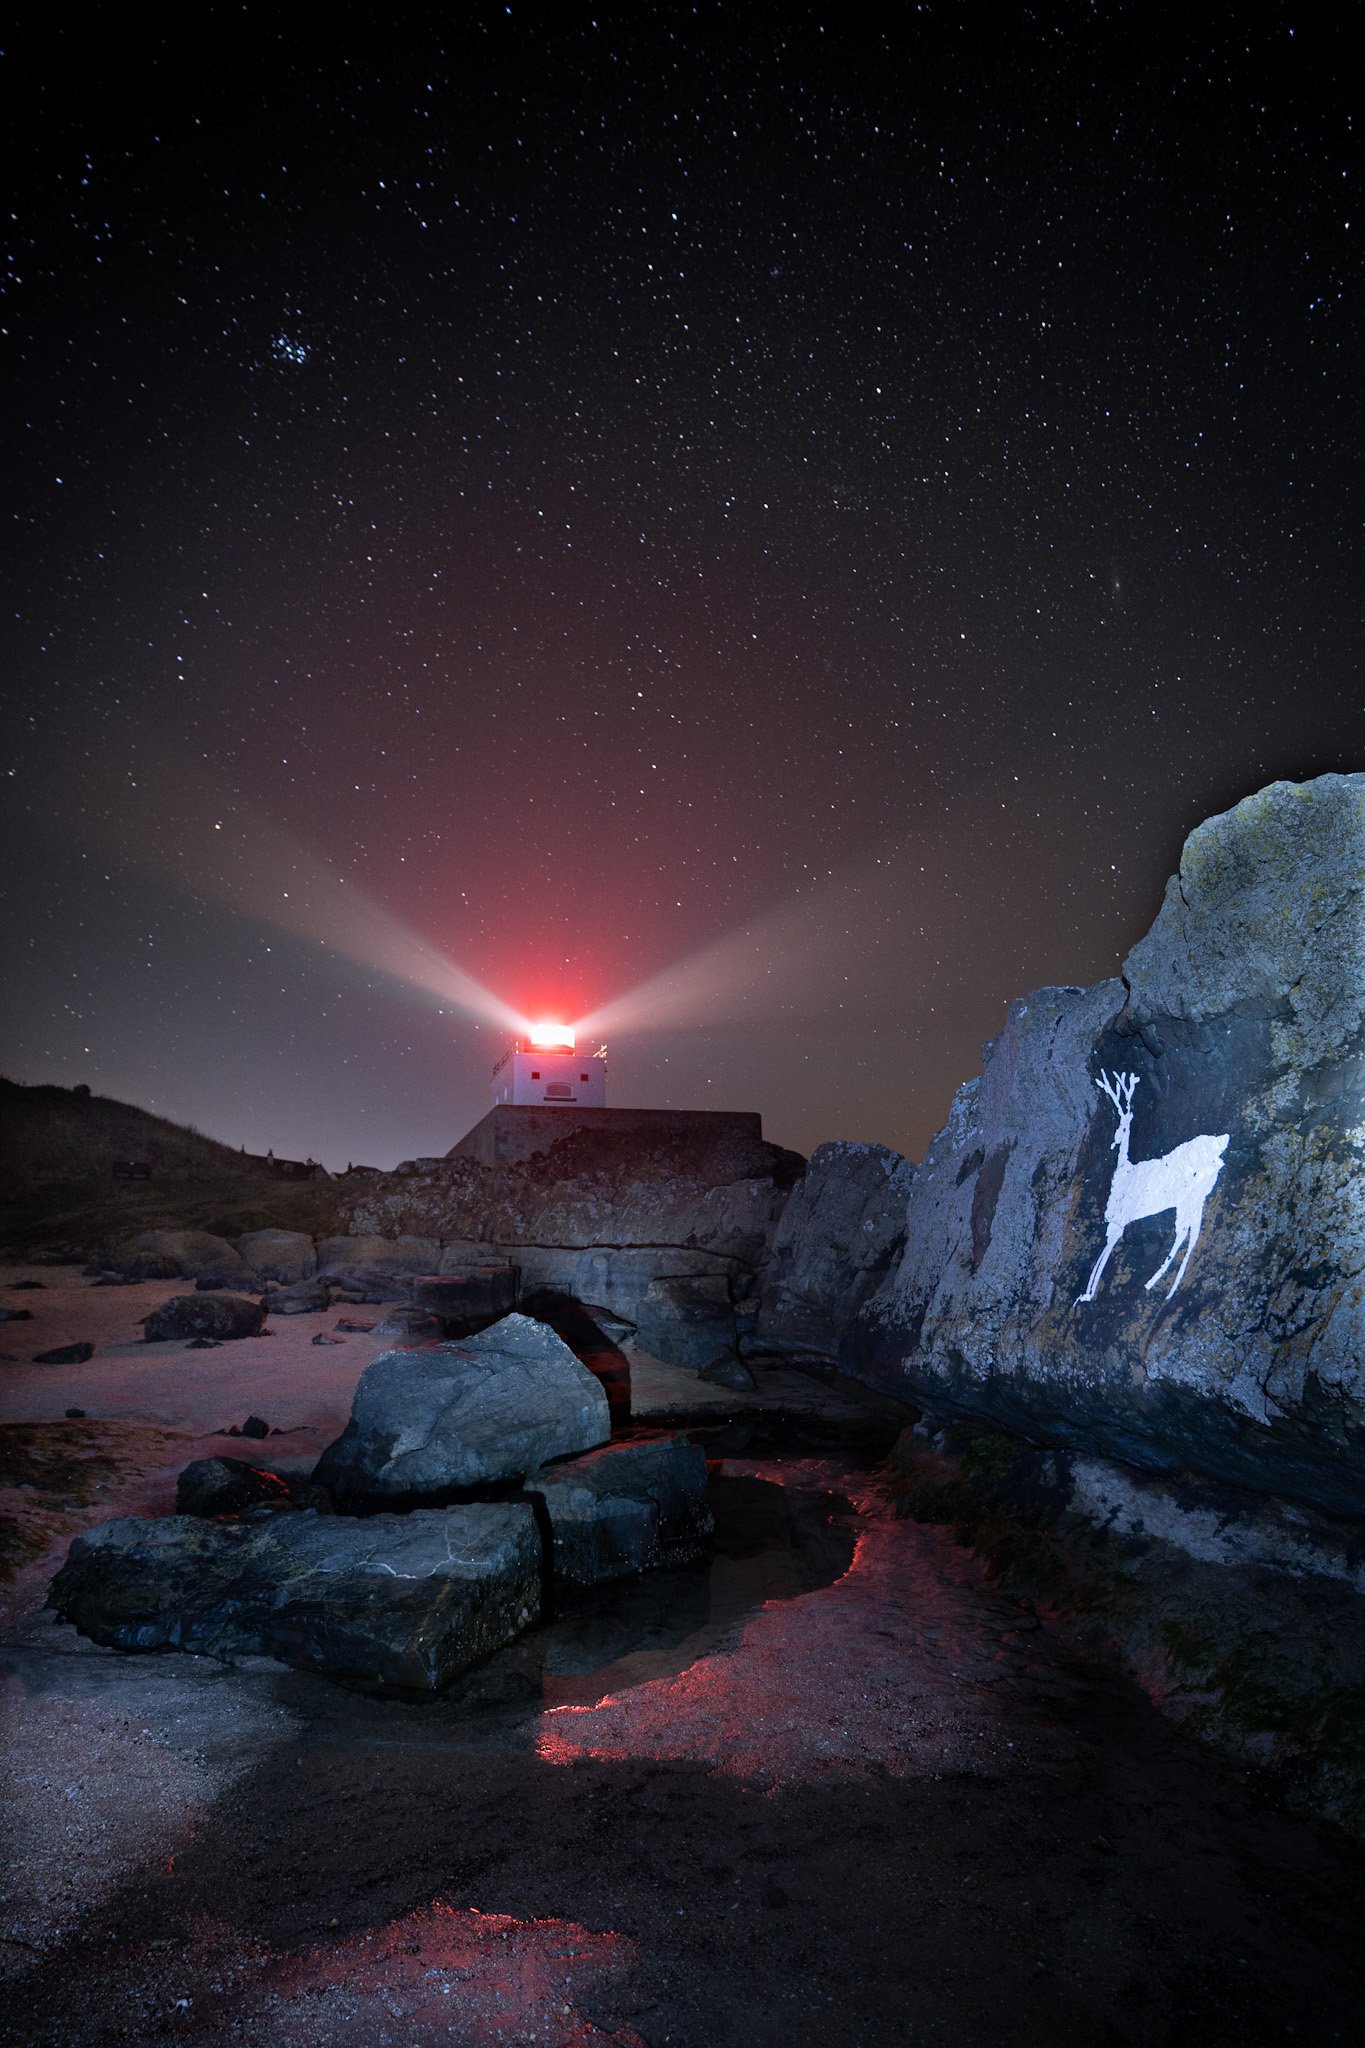 Stag Rock Moonscape, by Jim Scott